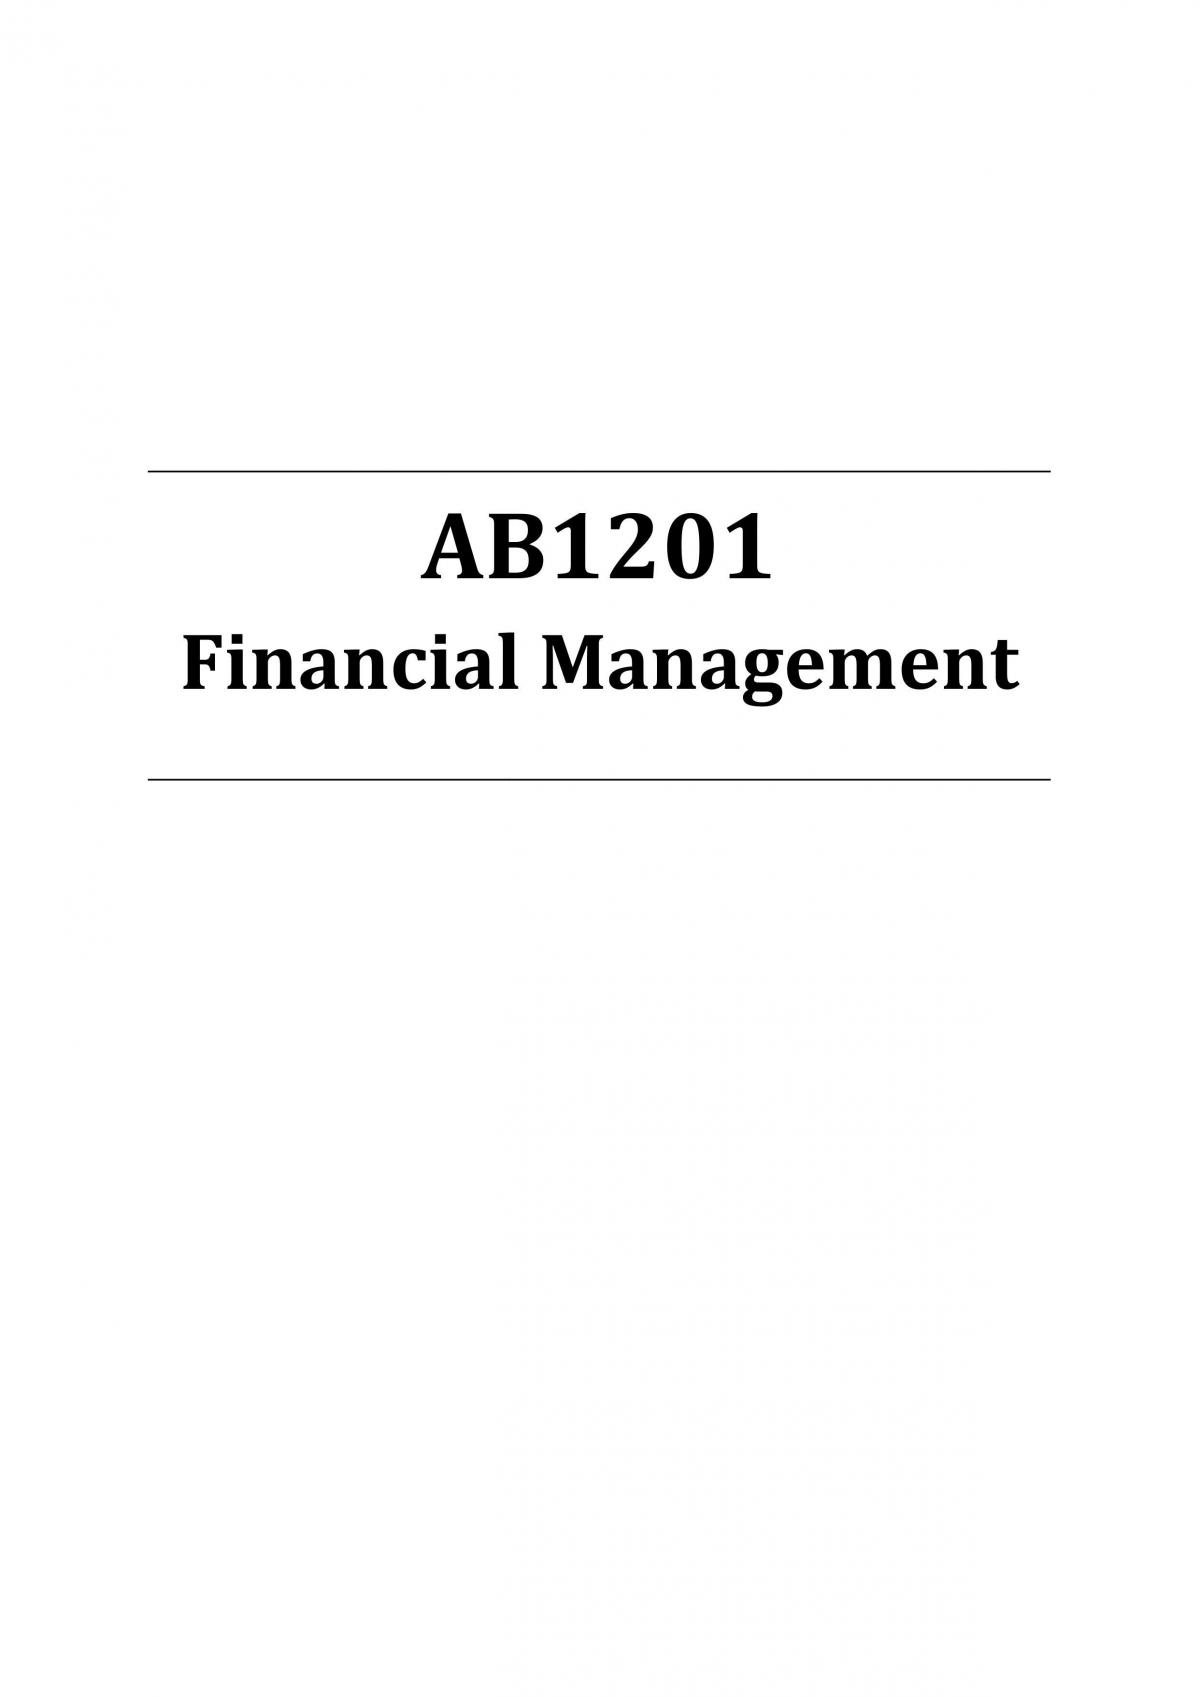 AB1201 Financial Management - Page 1